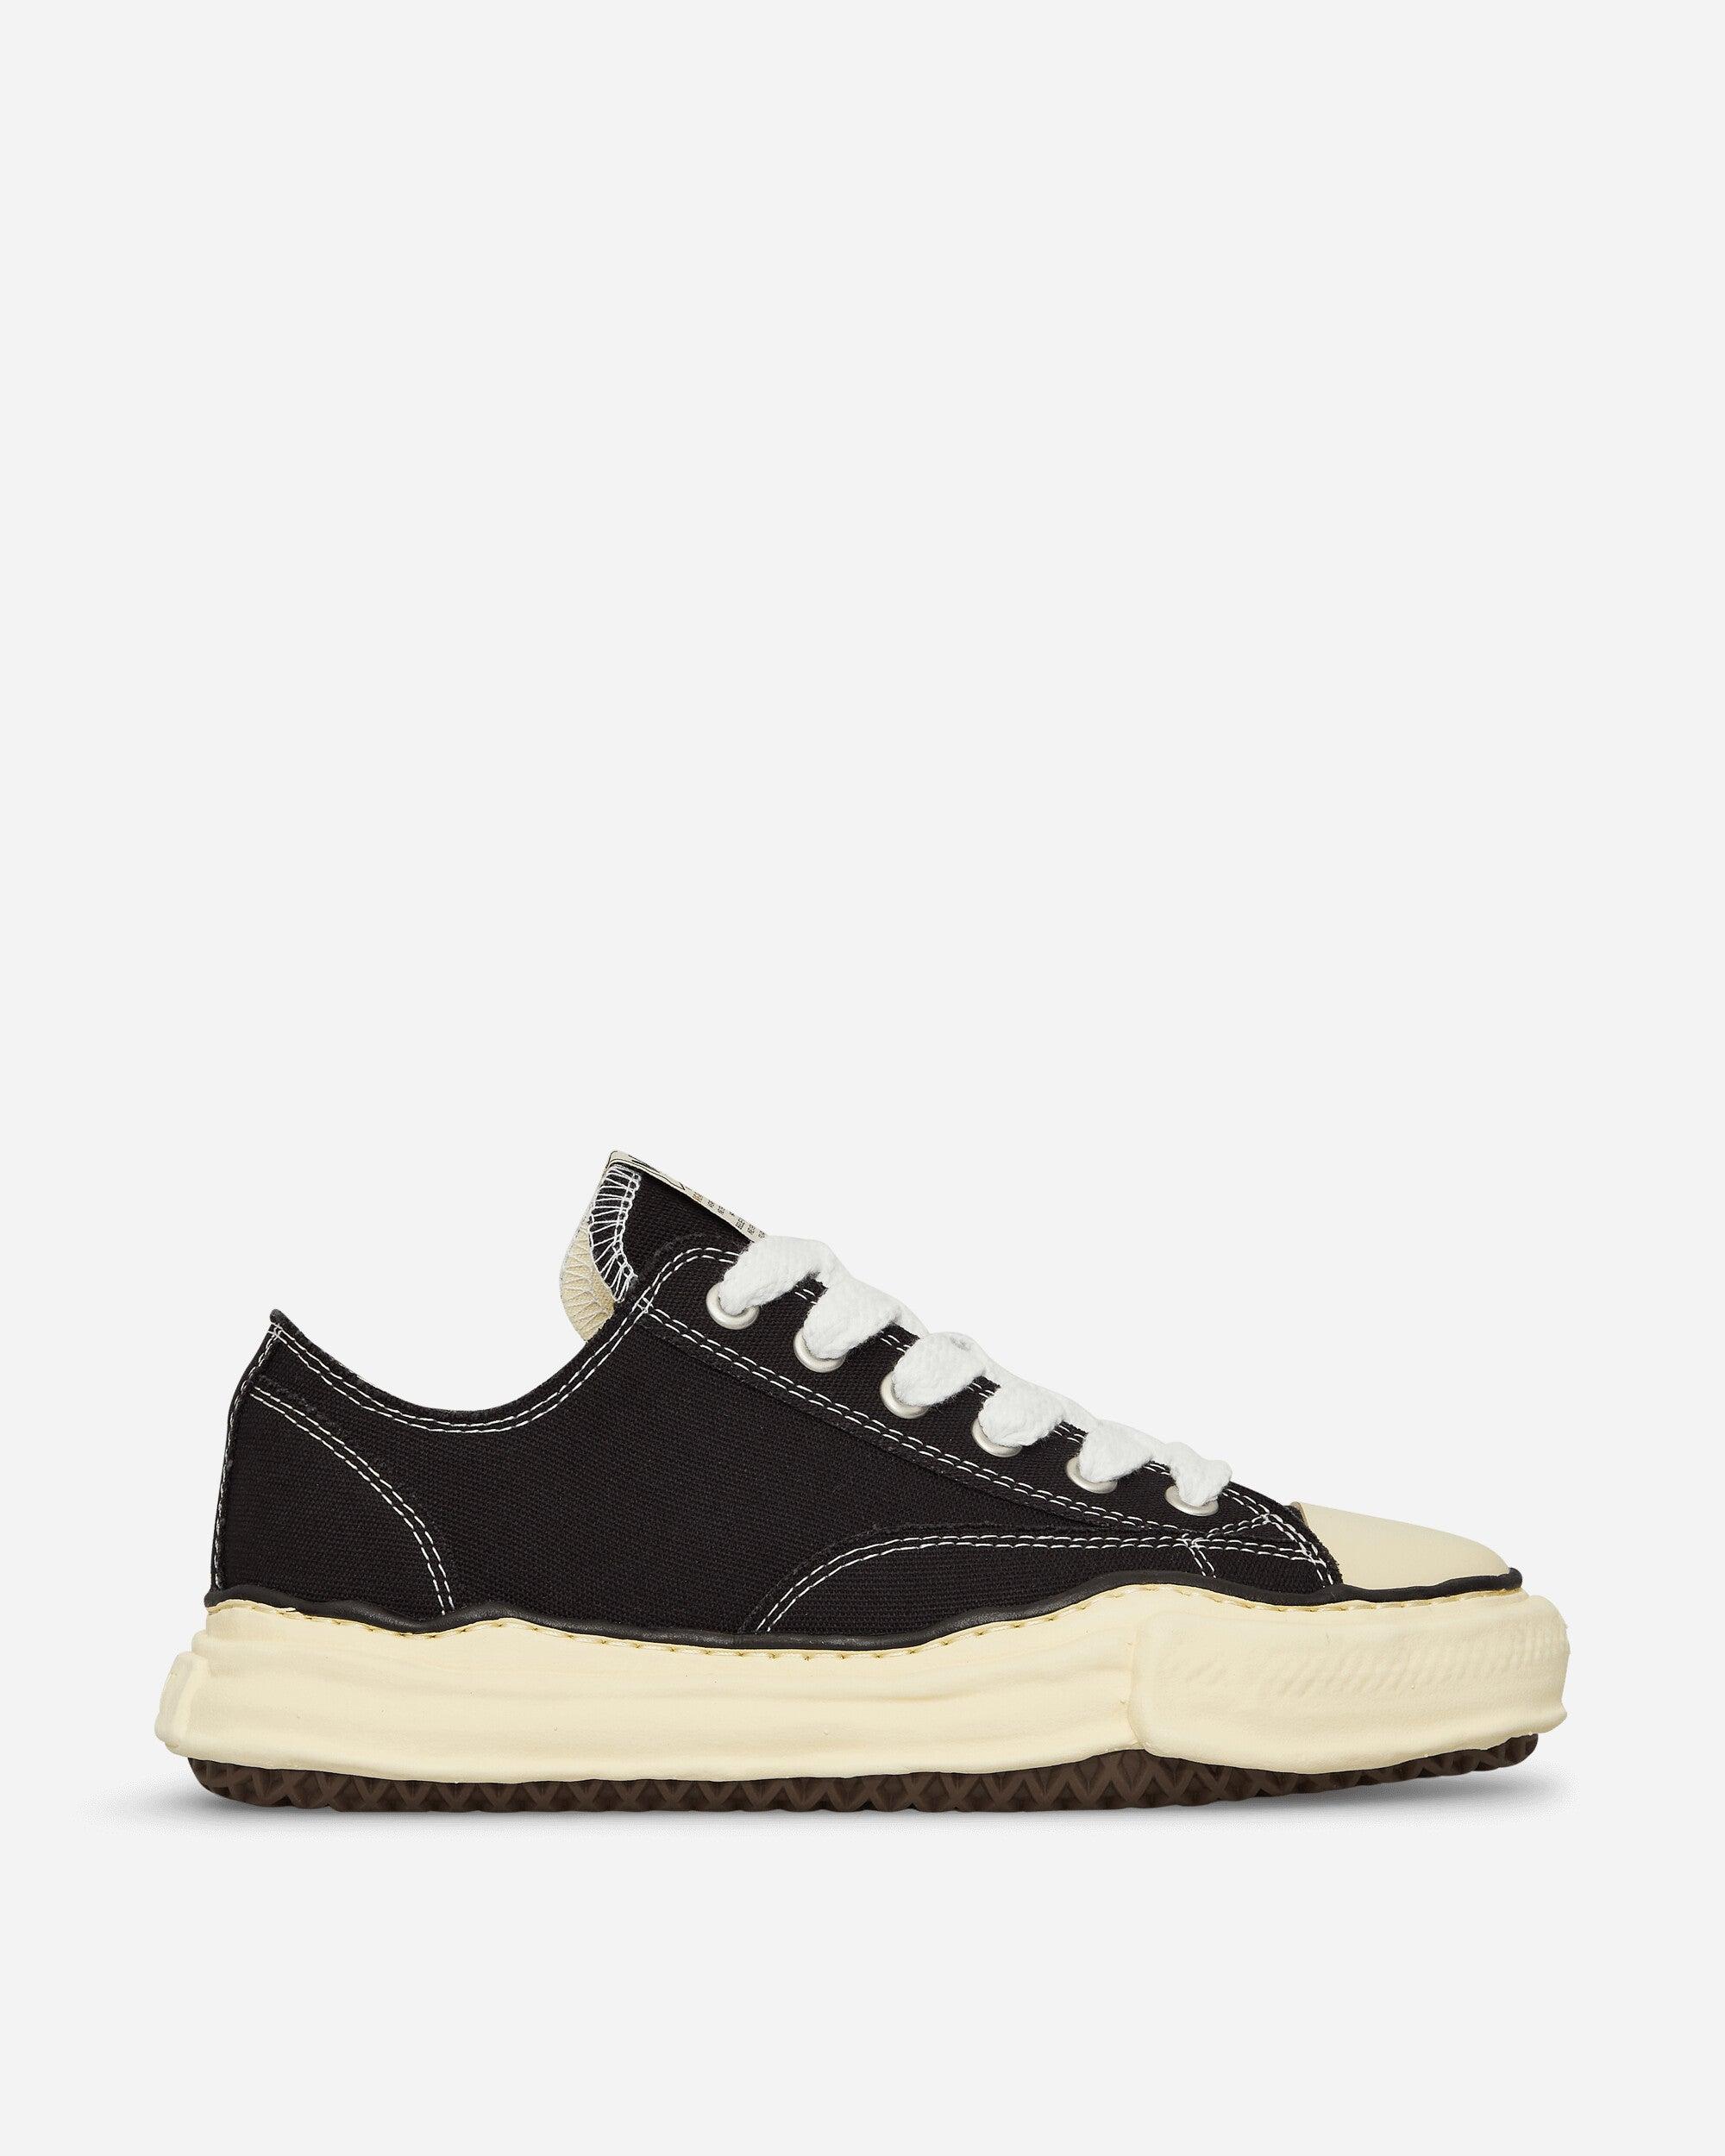 Maison Mihara Yasuhiro Peterson Vl Og Sole Canvas Low Sneakers in Black ...